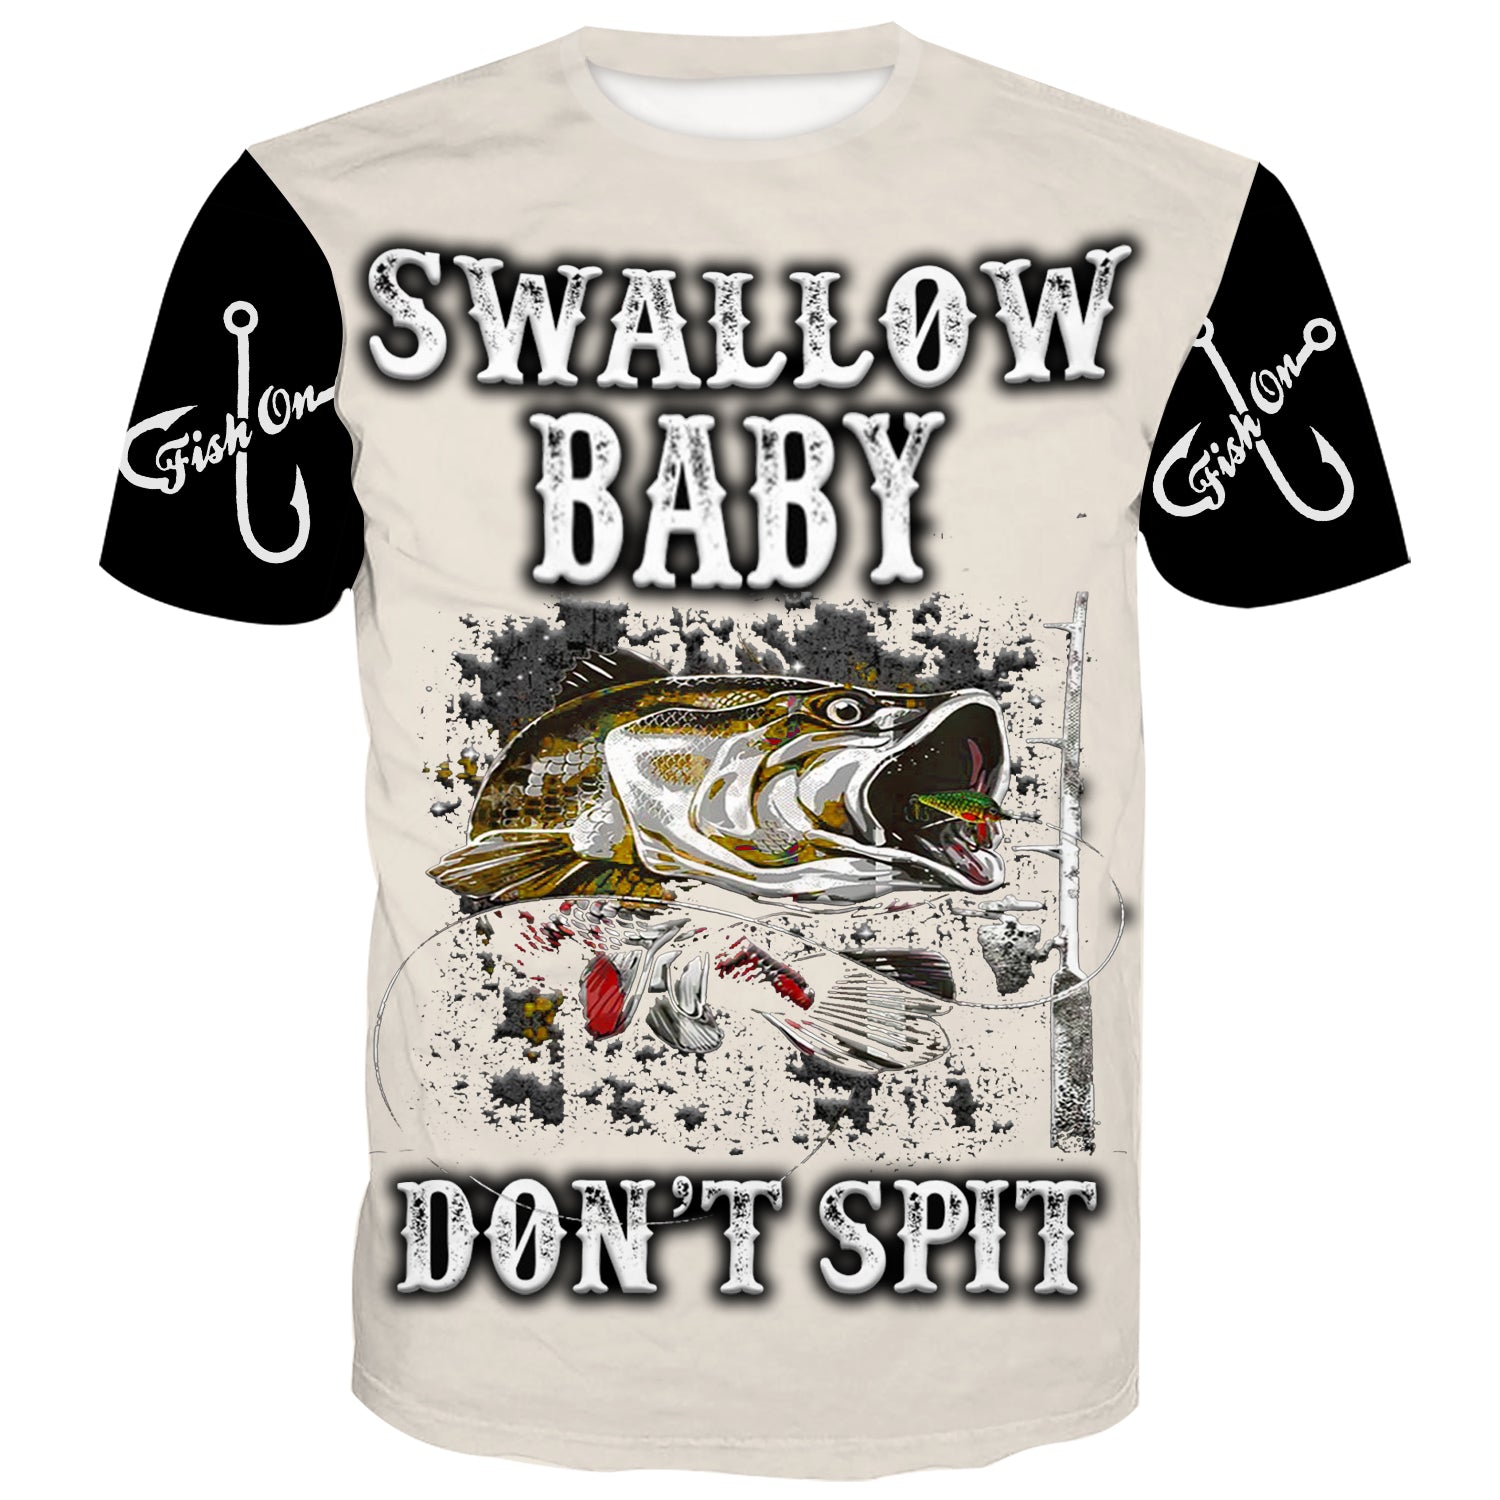 Swallow Baby, Don't Spit - T-Shirt